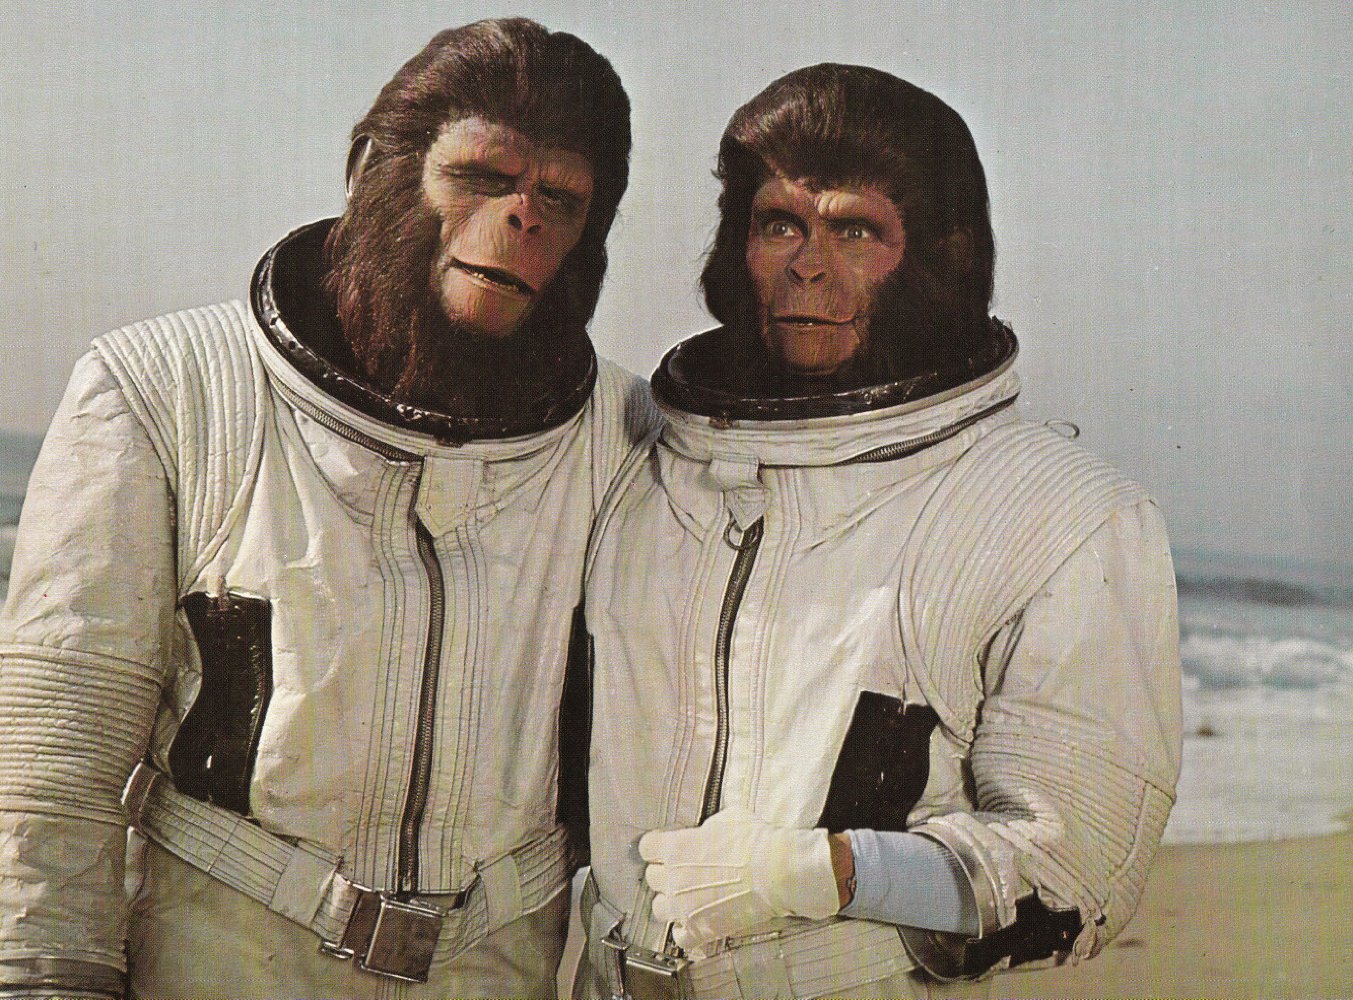 The planet of the apes